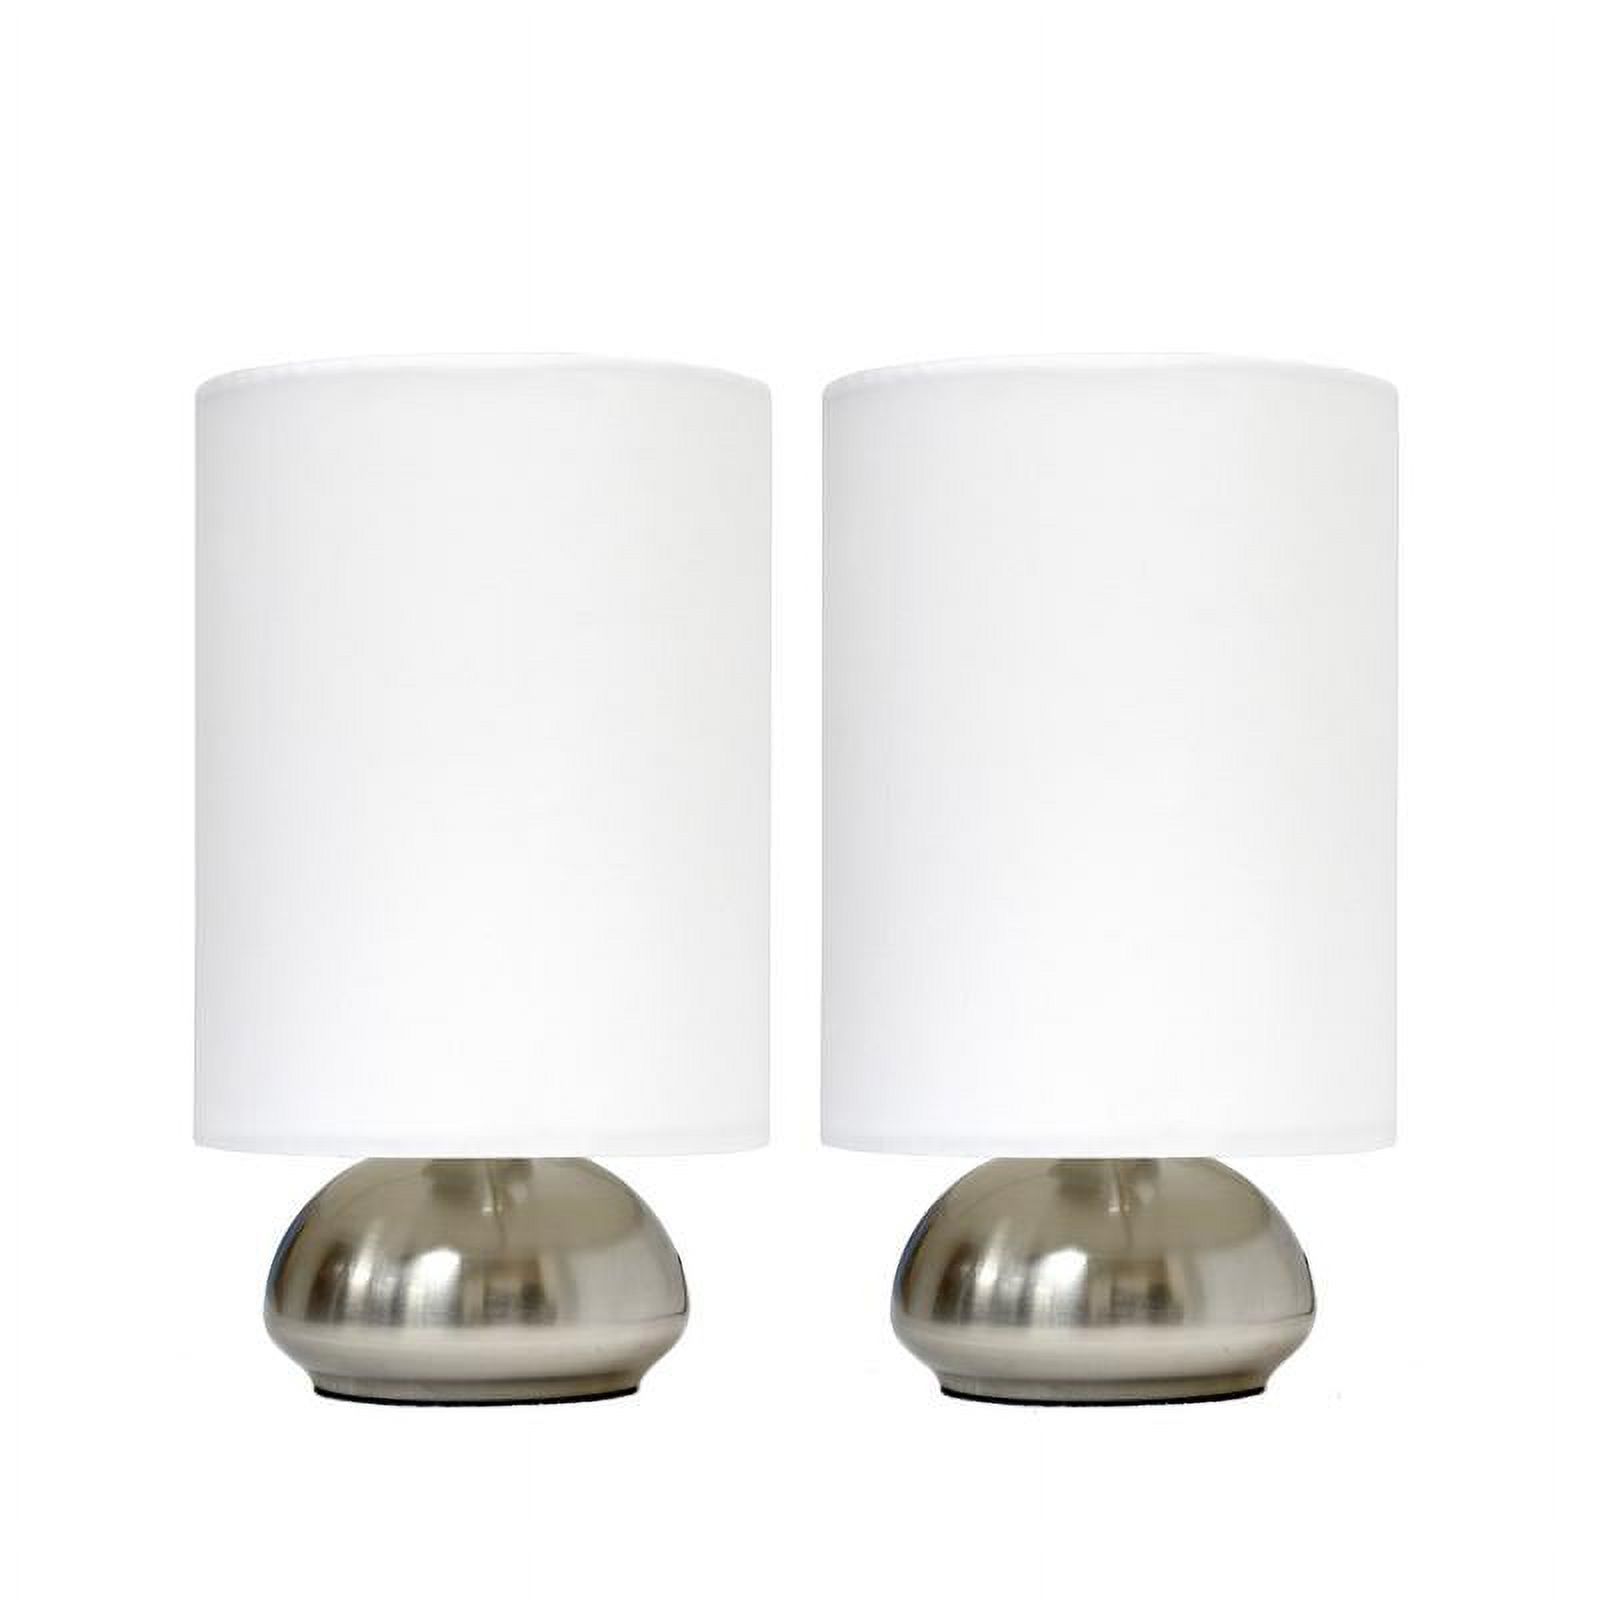 Simple Designs Gemini 2 Pack Mini Touch Lamp with Brushed Nickel Base and Ivy Fabric Shades - image 1 of 3